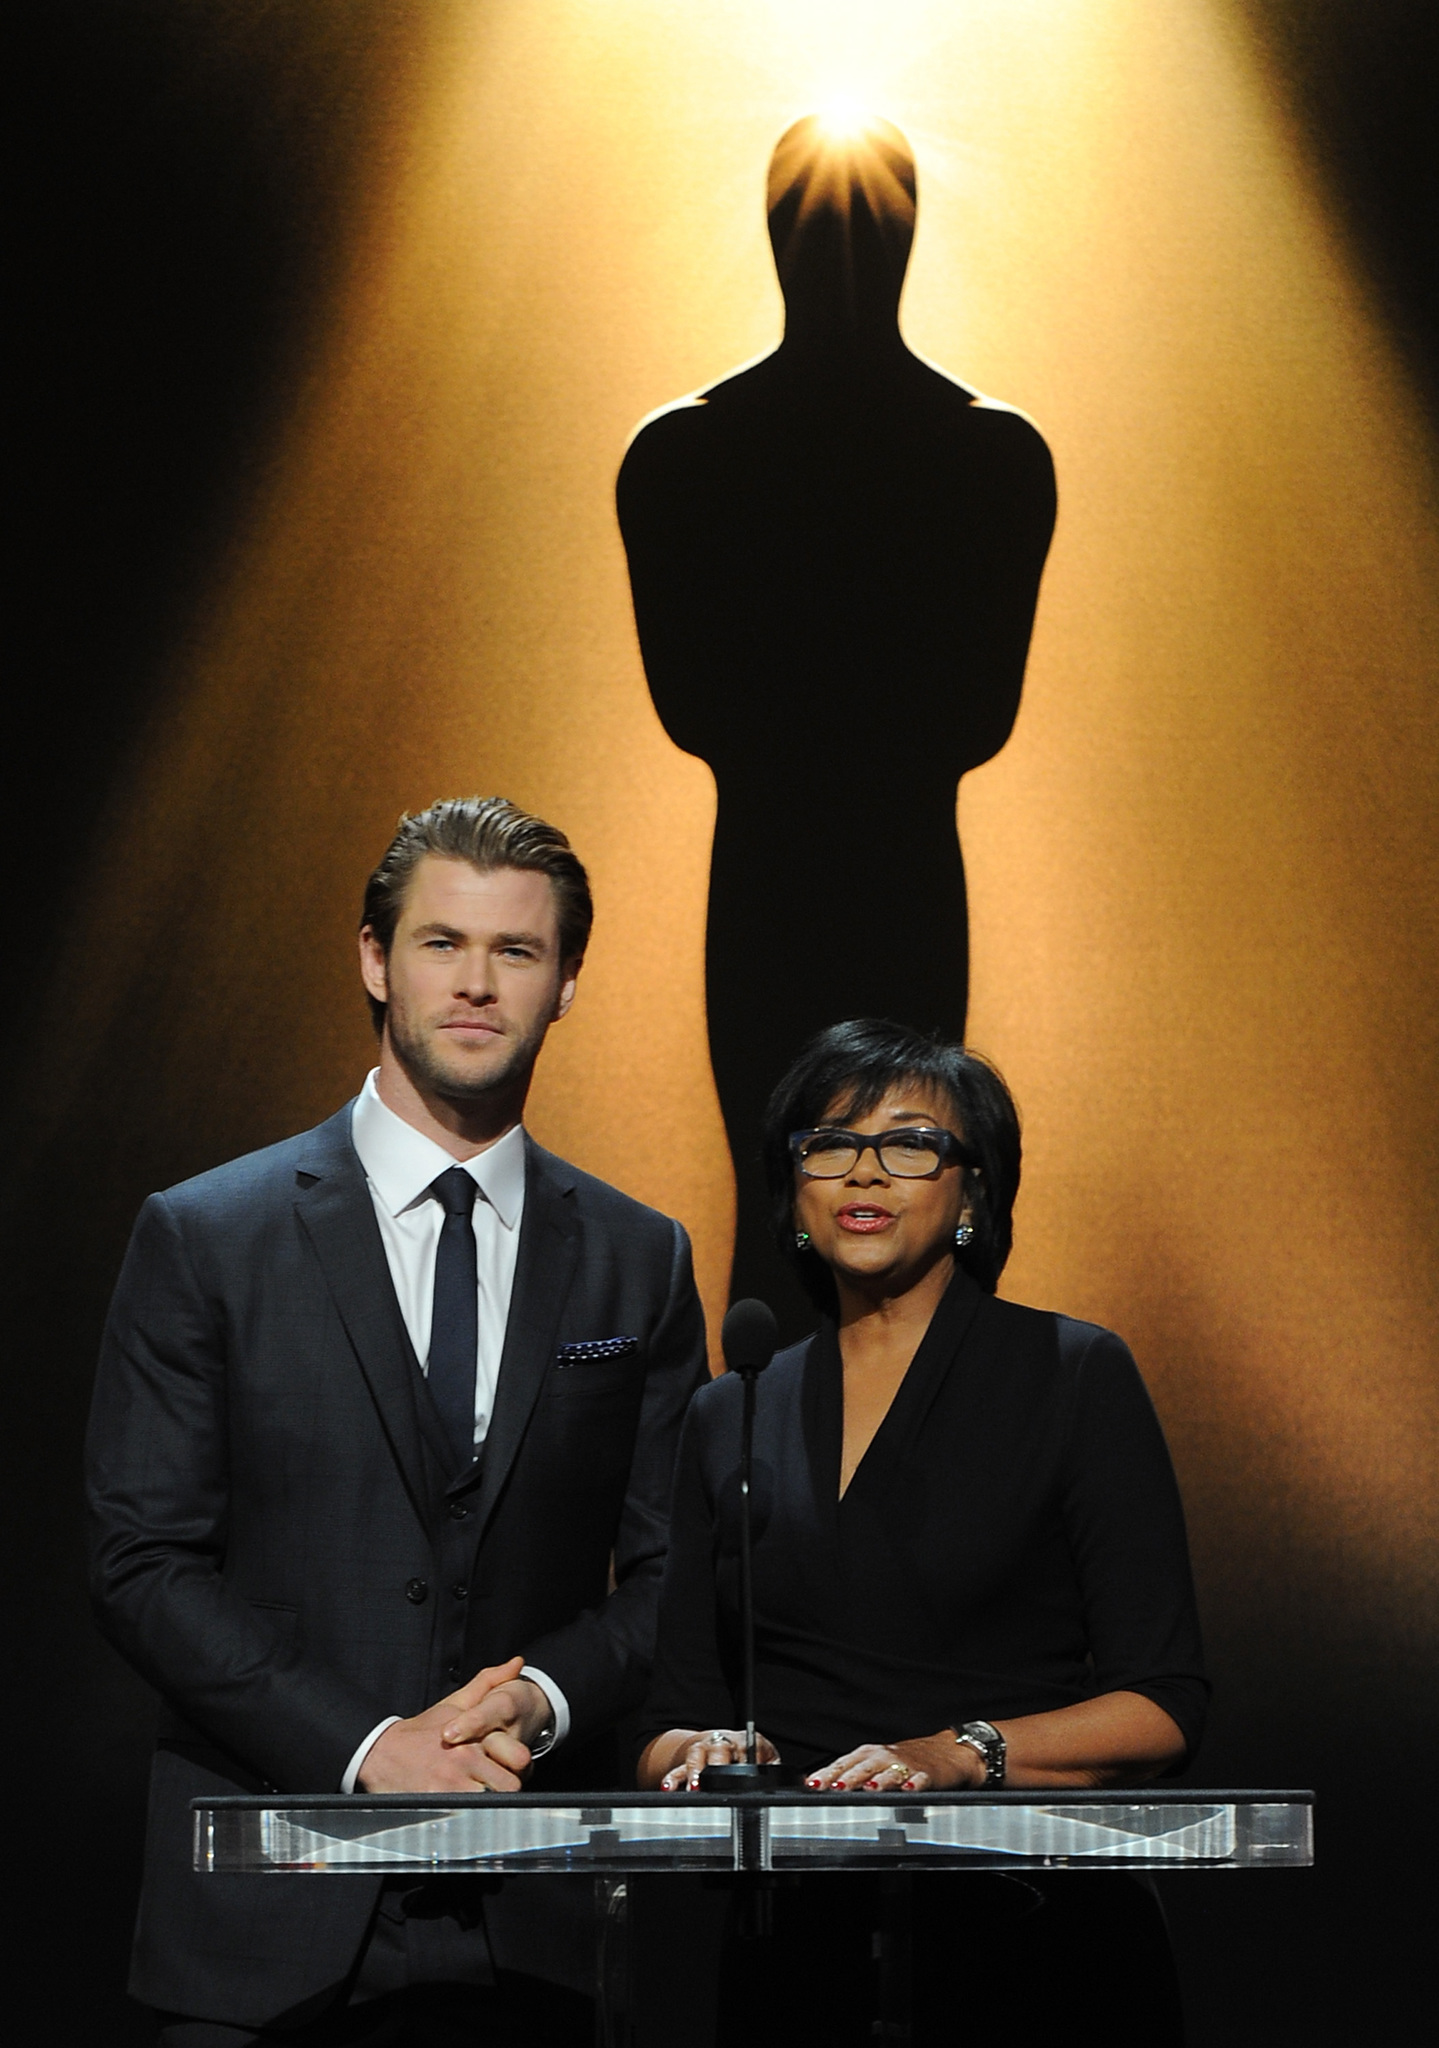 Chris Hemsworth and Cheryl Boone Isaacs at event of The Oscars (2014)